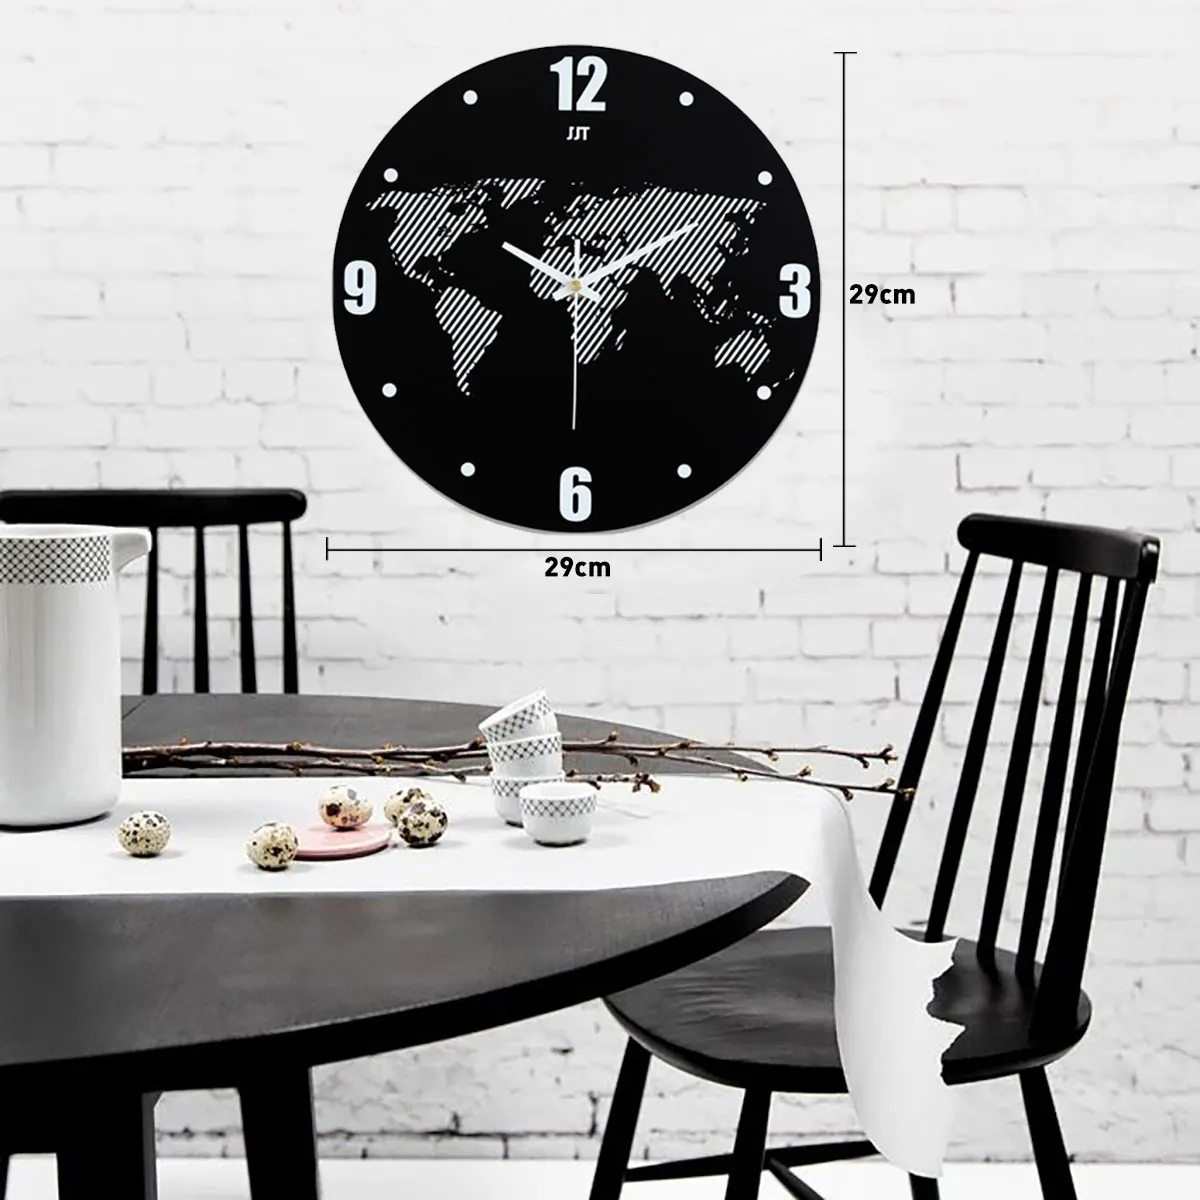 

European Style Wall Clocks Silent World Map Wooden MDF Digital Wall Clock Modern Round Large Wall Clocks For Home Office Decor